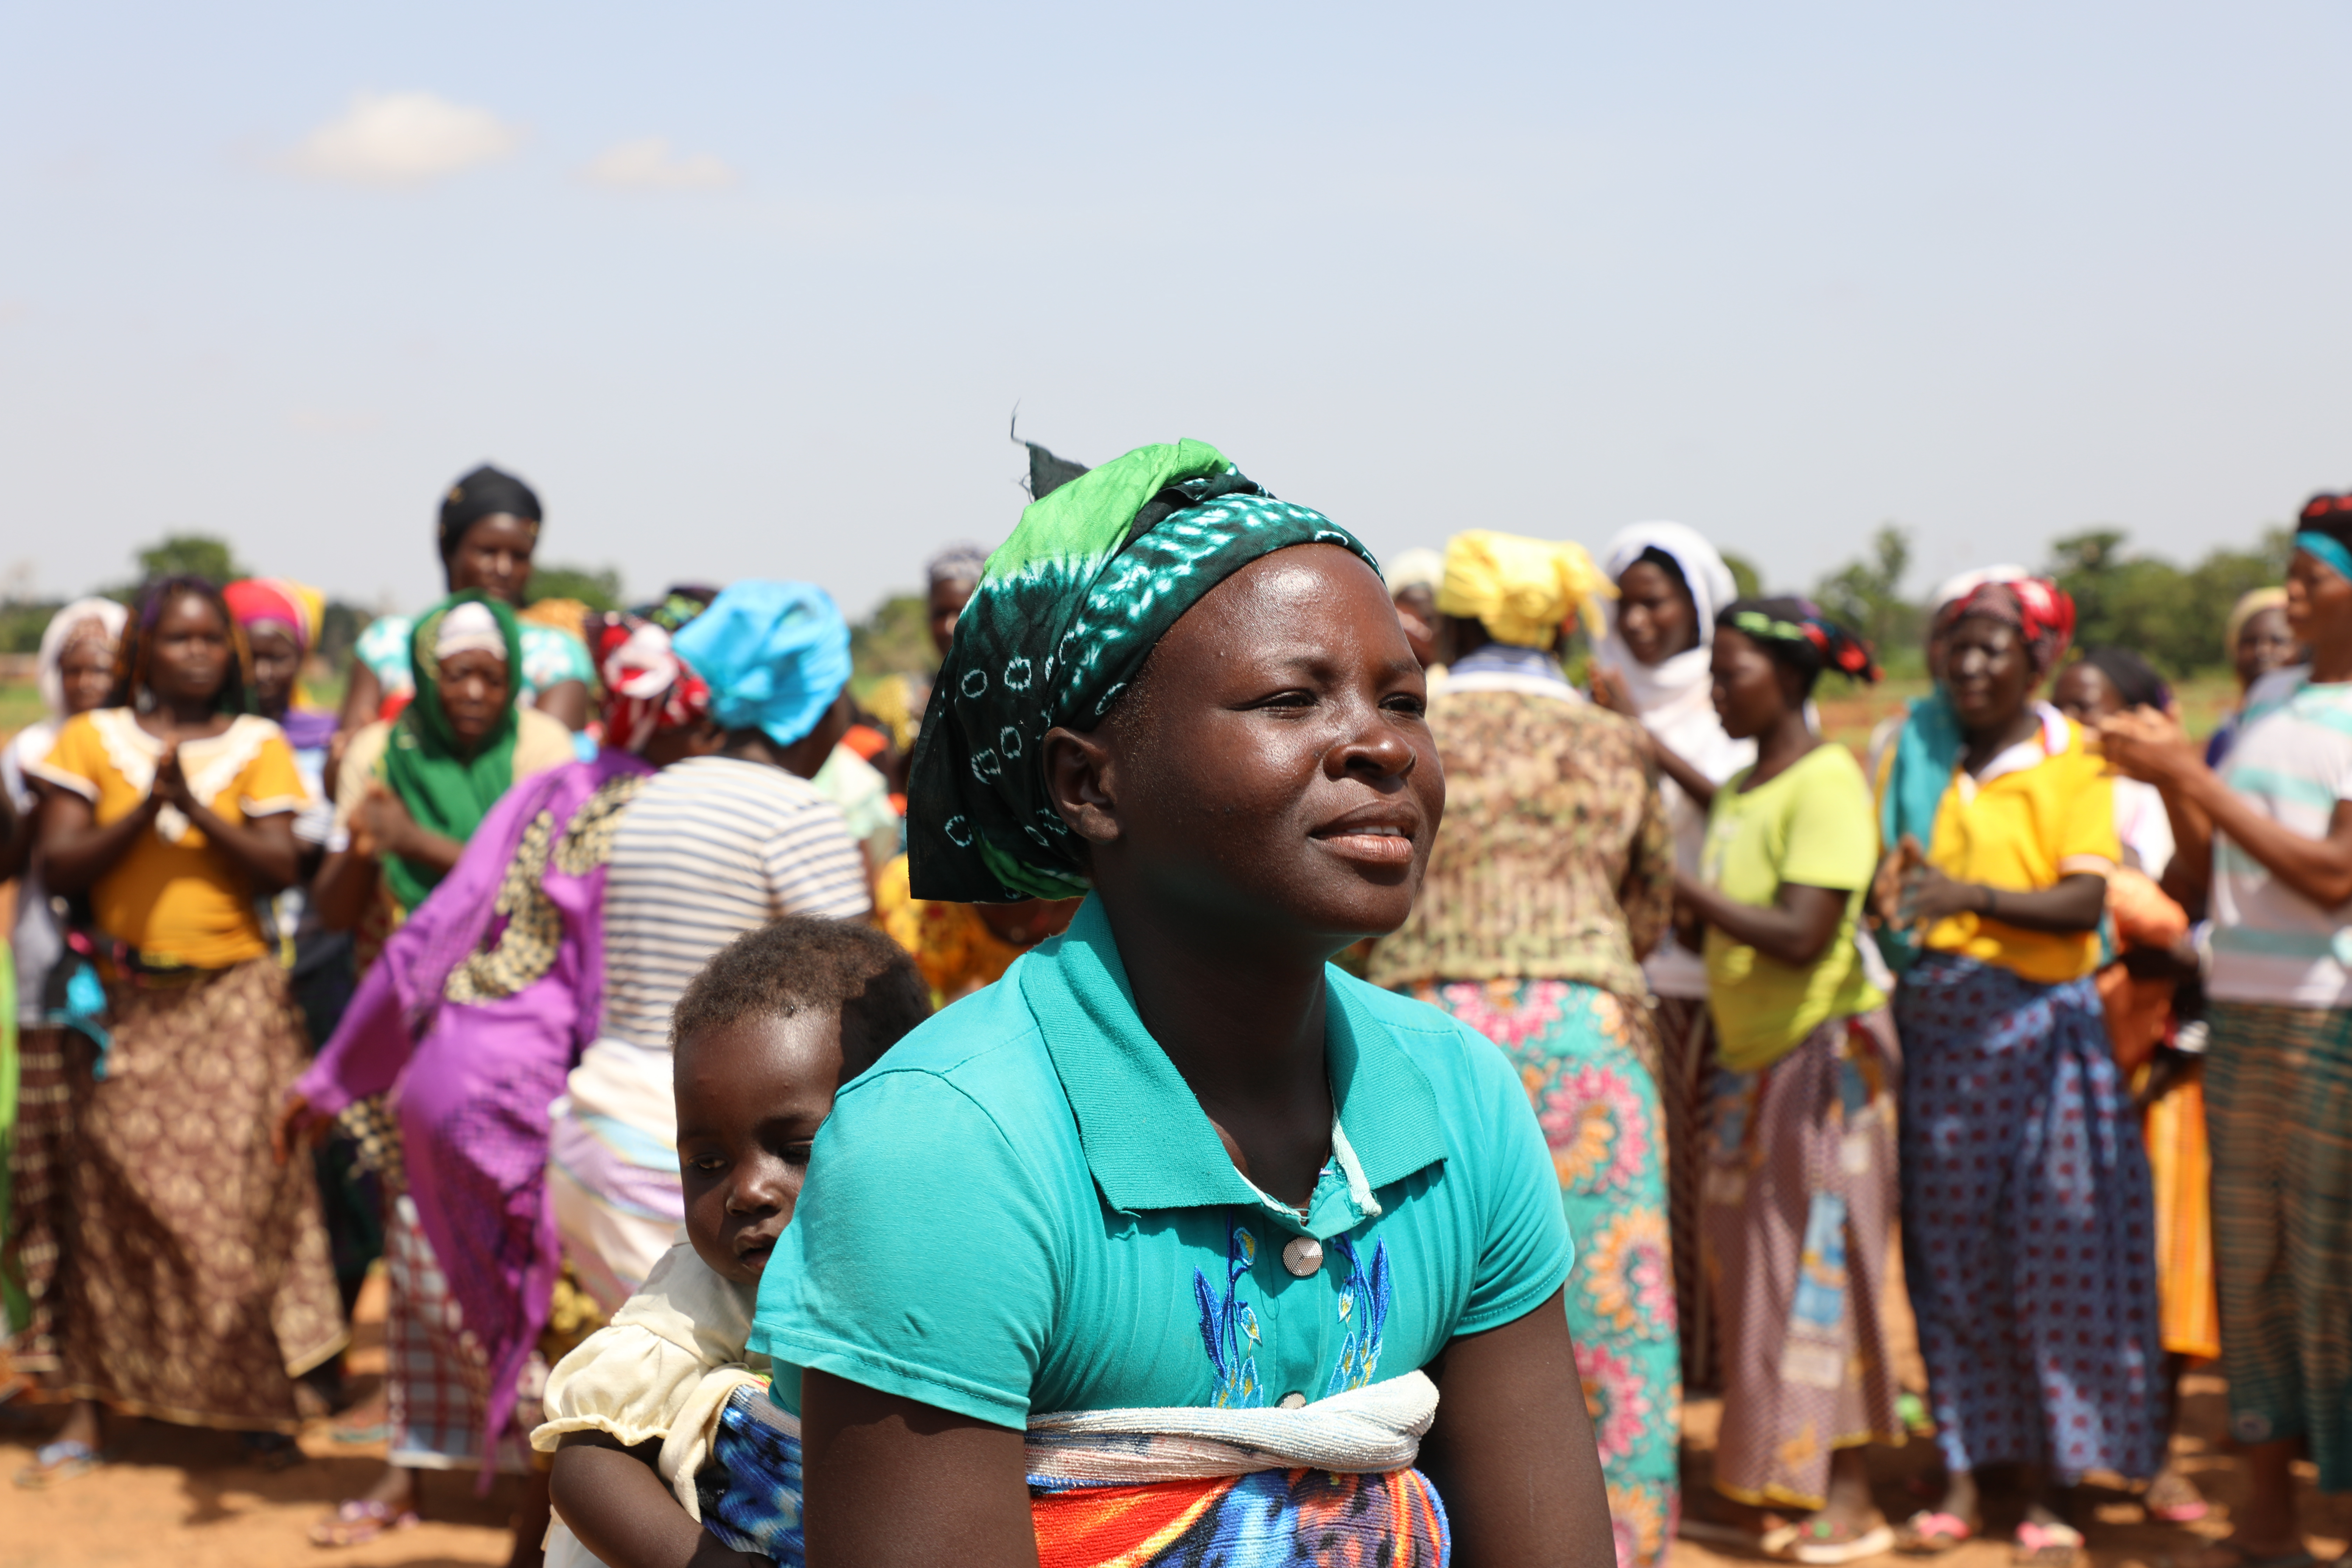 Food assistance is provided for people struggling to feed themselves in the lean season in Burkina Faso